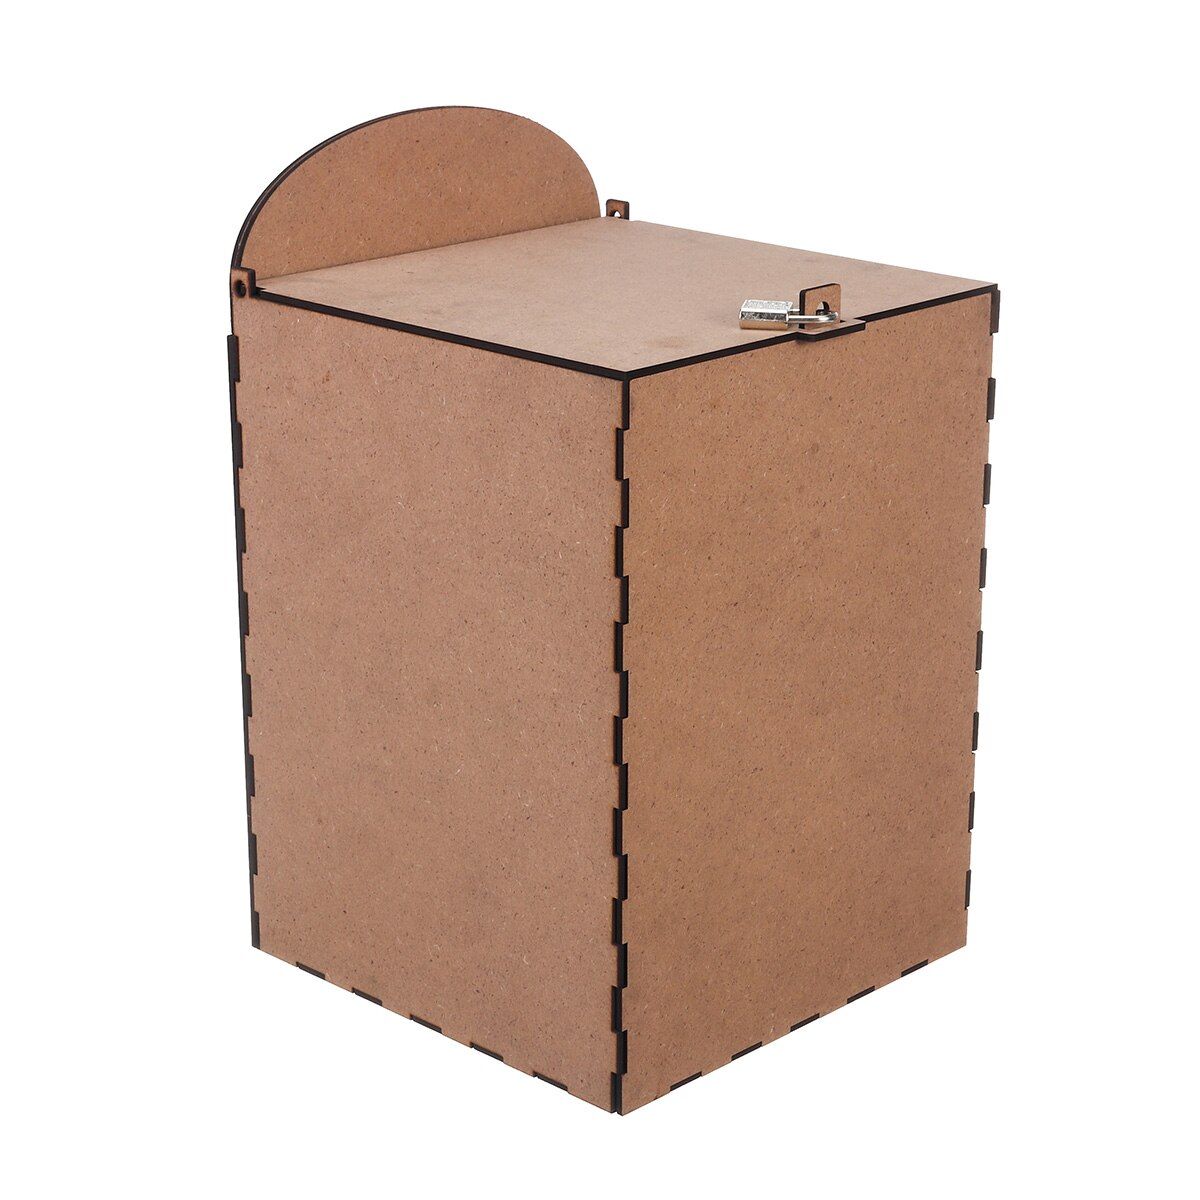 MDF Wedding Card Boxes for Decoration of Celebrations and Events Country Wedding Urn Treasury DIY Card Box with Lock Keys